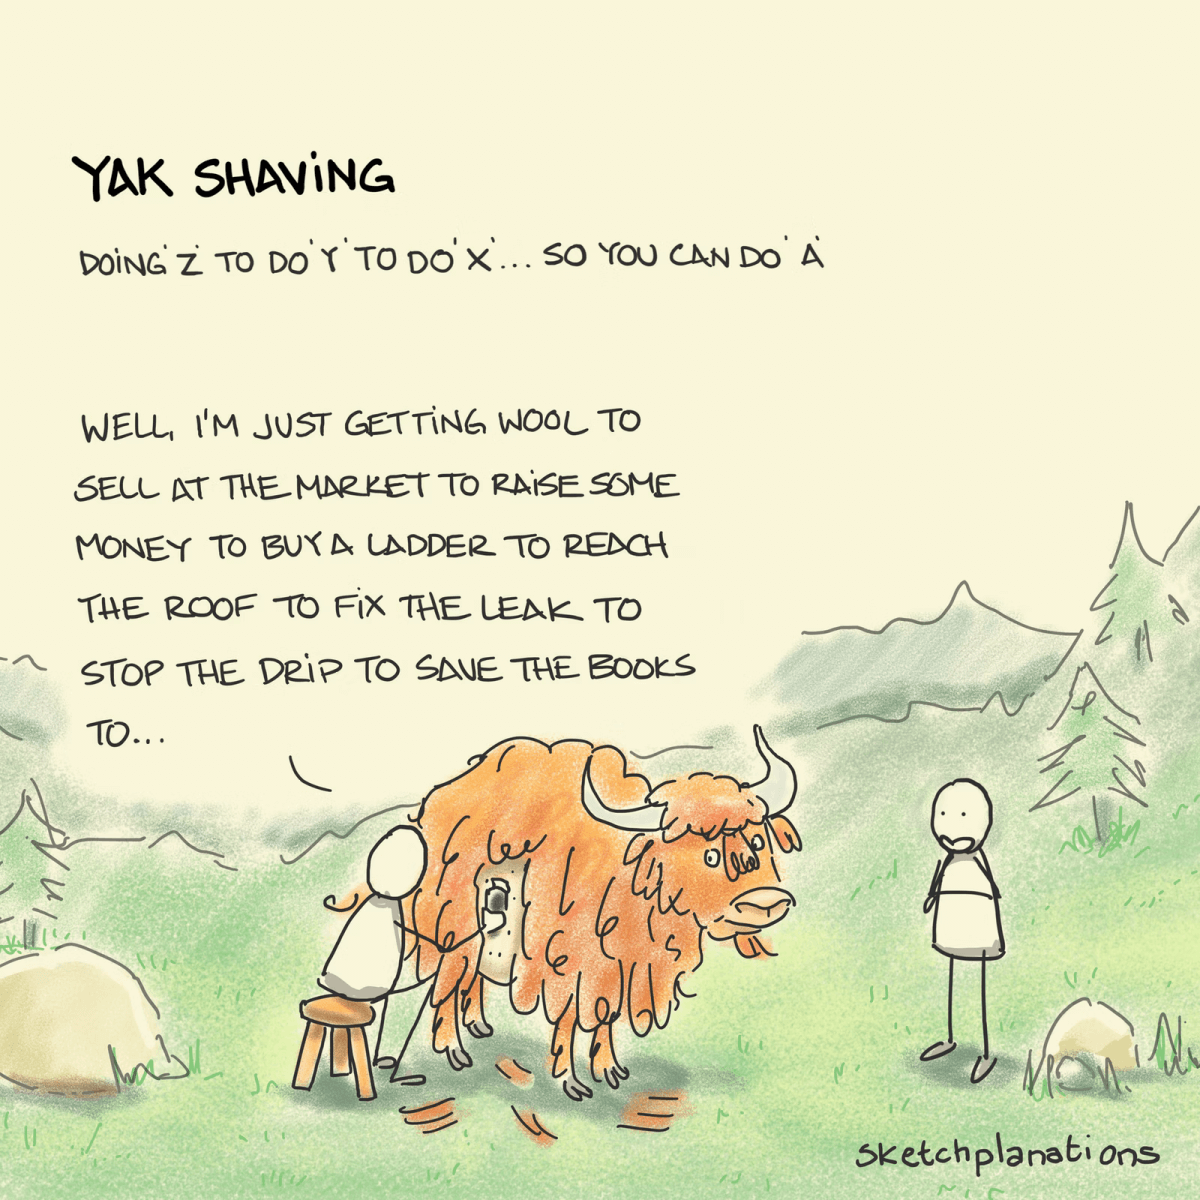 Yak shaving describes how when setting out to do something, you found you had to first do something else, which needed you to finish this other thing, and so on until you found yourself shaving a yak, or equally unrelated activity, to do the first thing you set out to do.